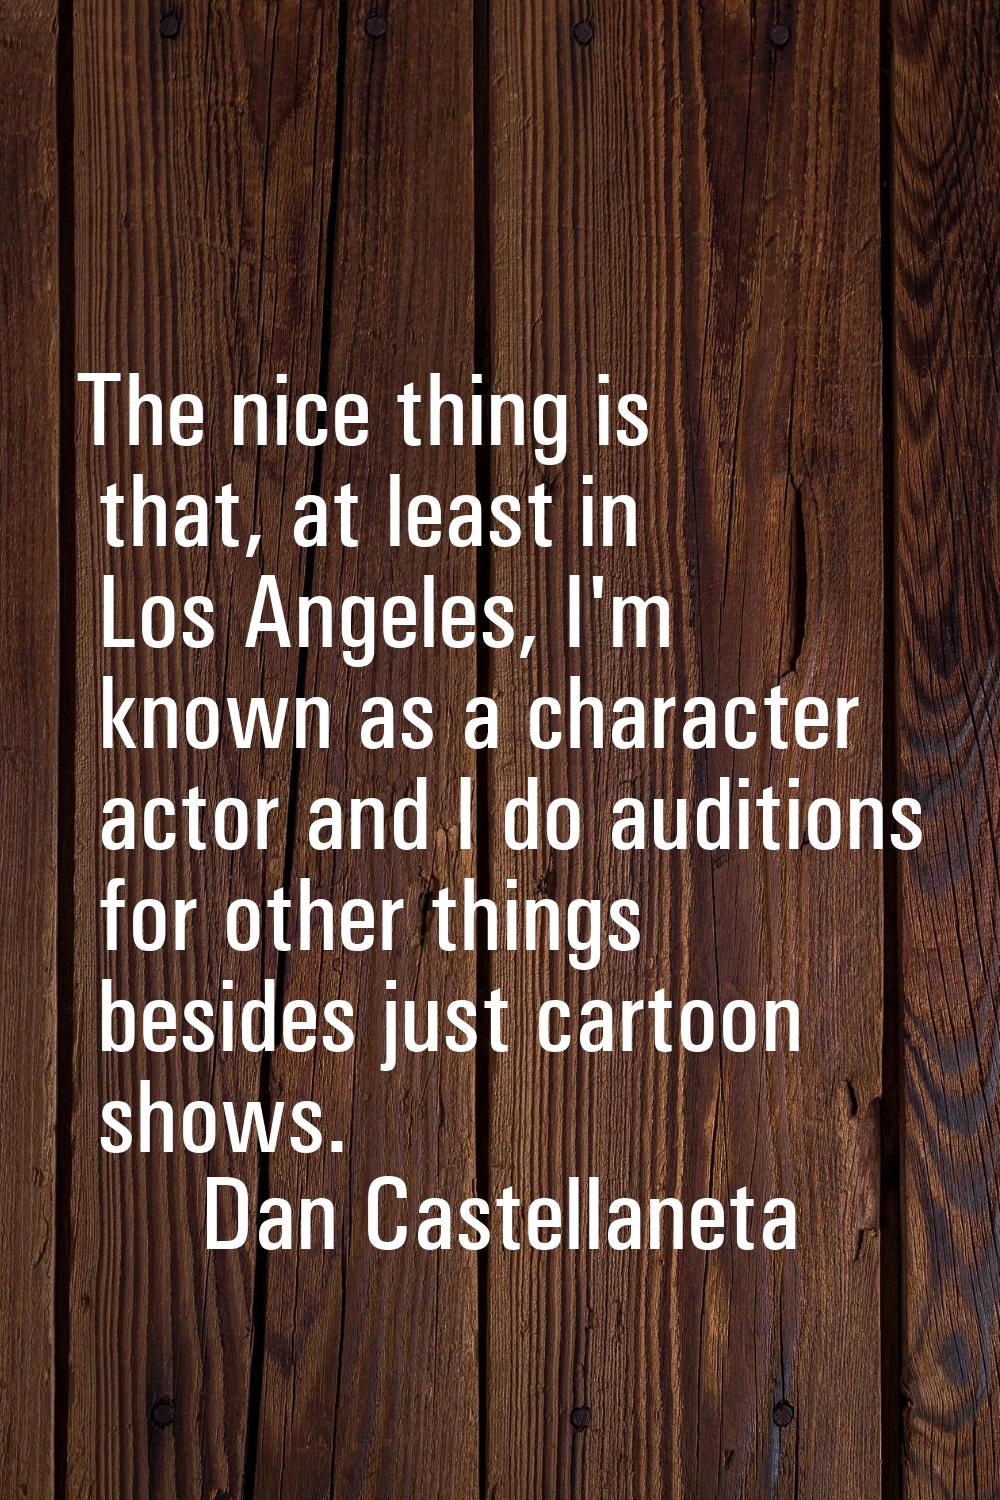 The nice thing is that, at least in Los Angeles, I'm known as a character actor and I do auditions 